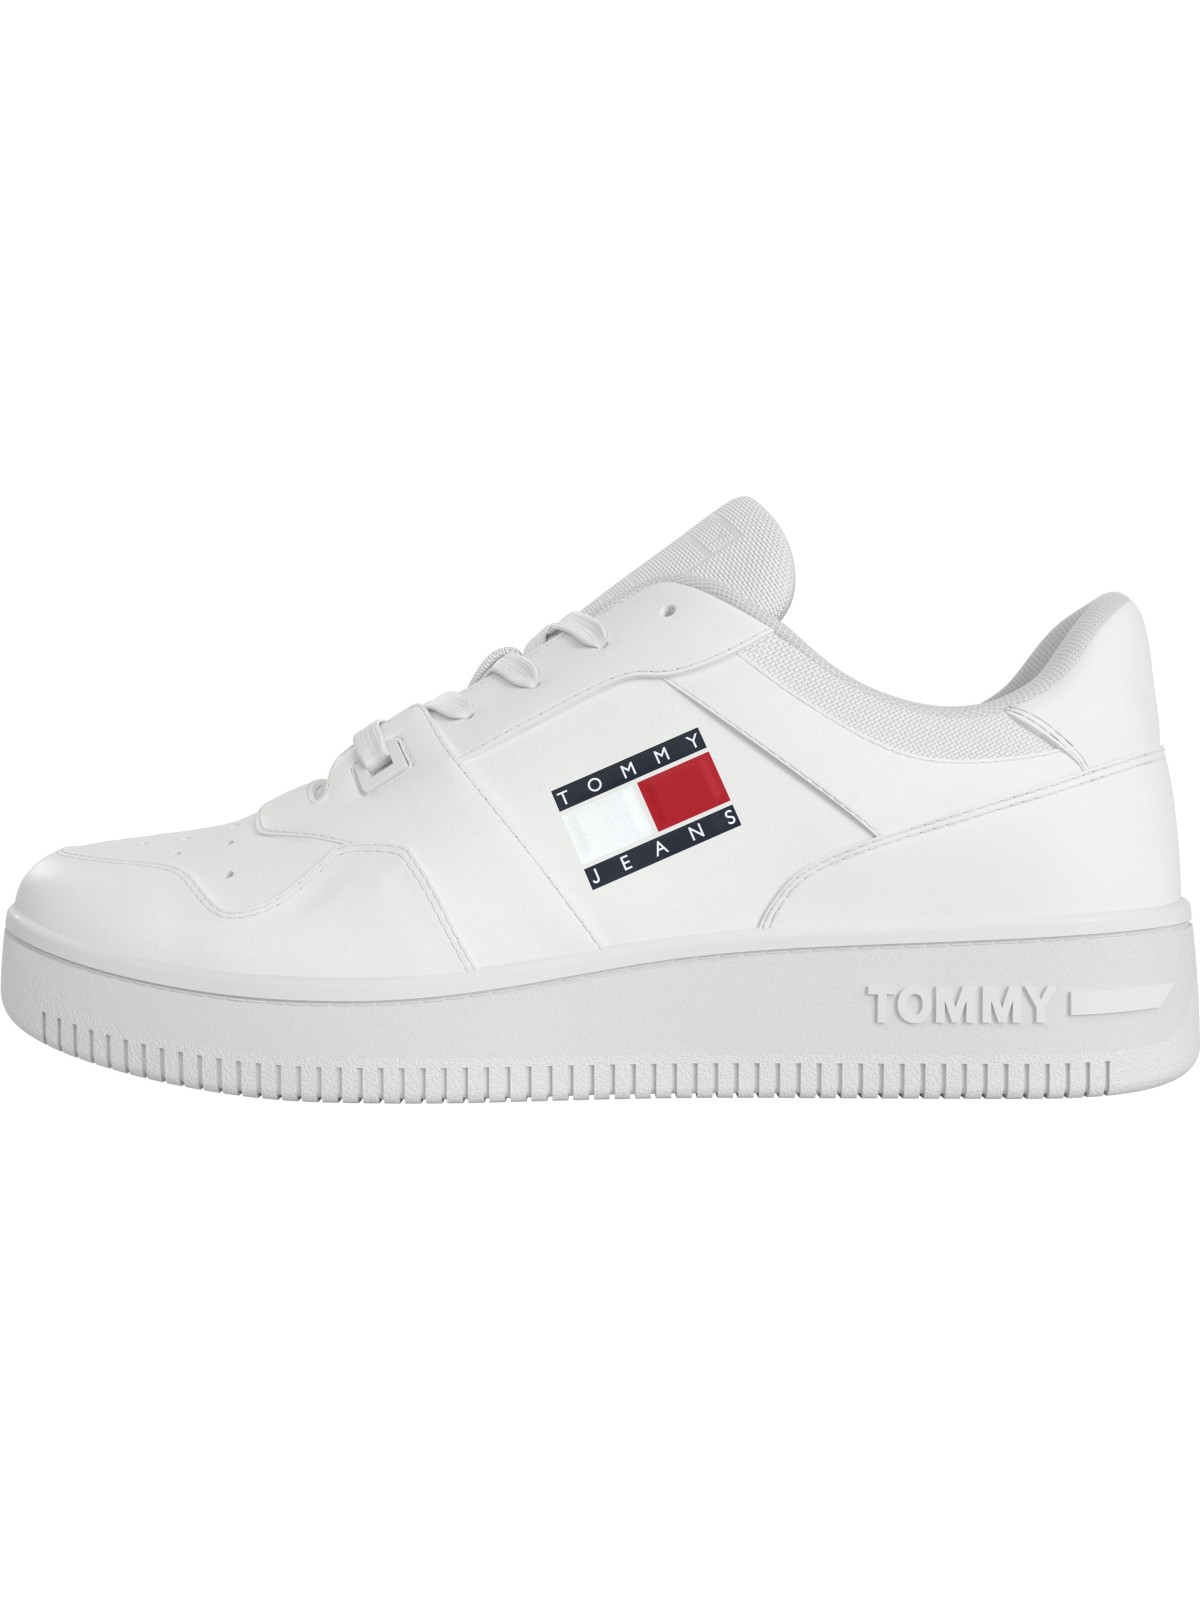 TOMMY JEANS RETRO BA